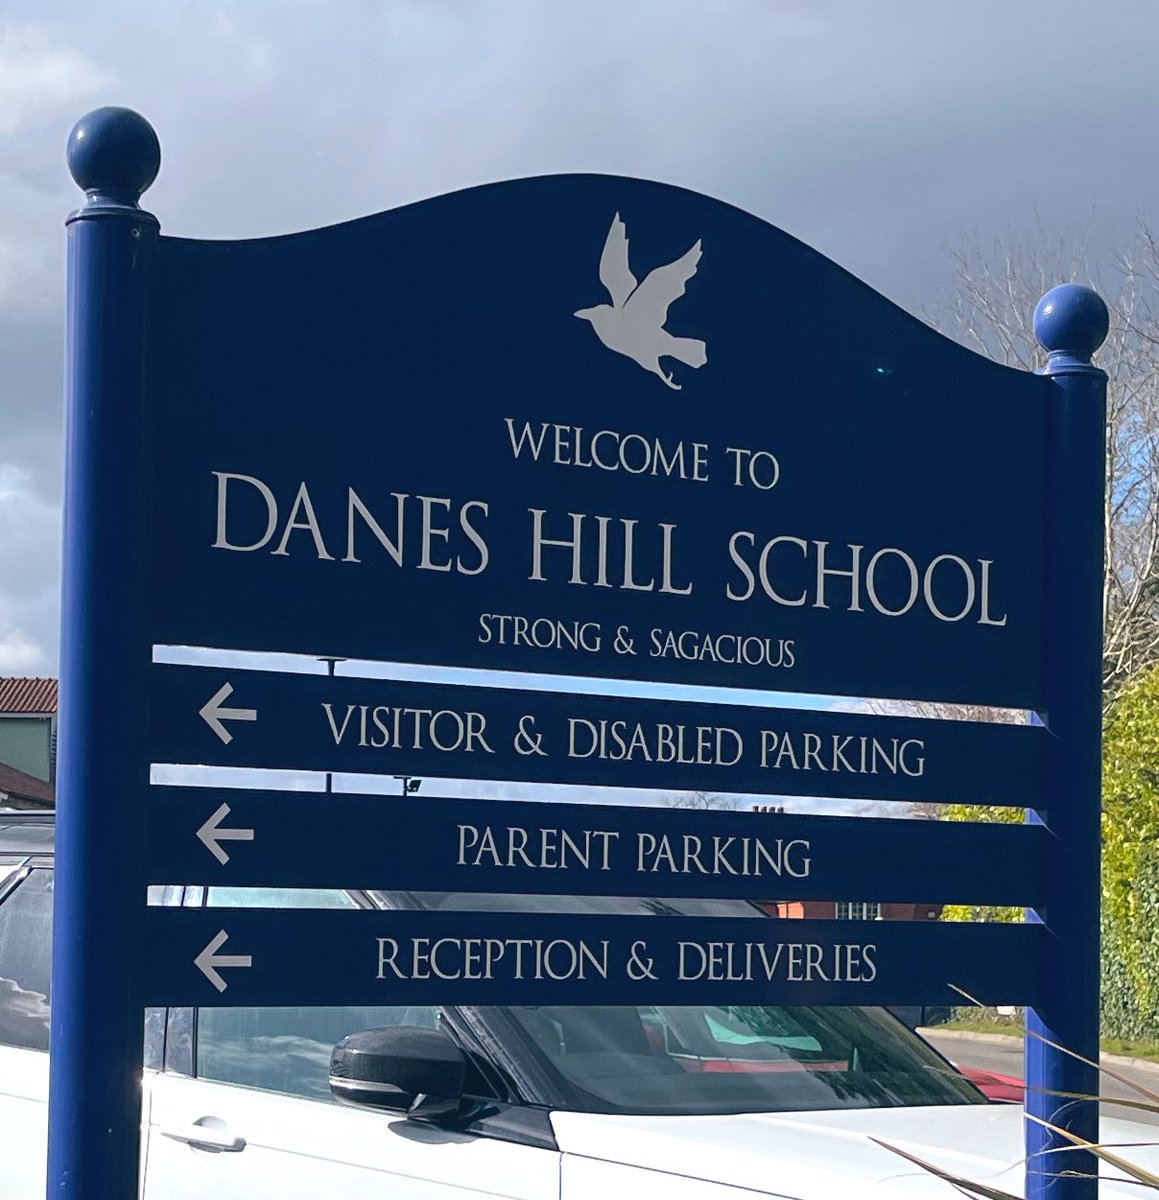 Congratulations to the staff and pupils Danes Hill for such an impressive Future Schools event. Great to see so many top schools represented and that it was so well attended. #topschools #findingthebestschool #debrettseducation #schooladvice #educationconsultants